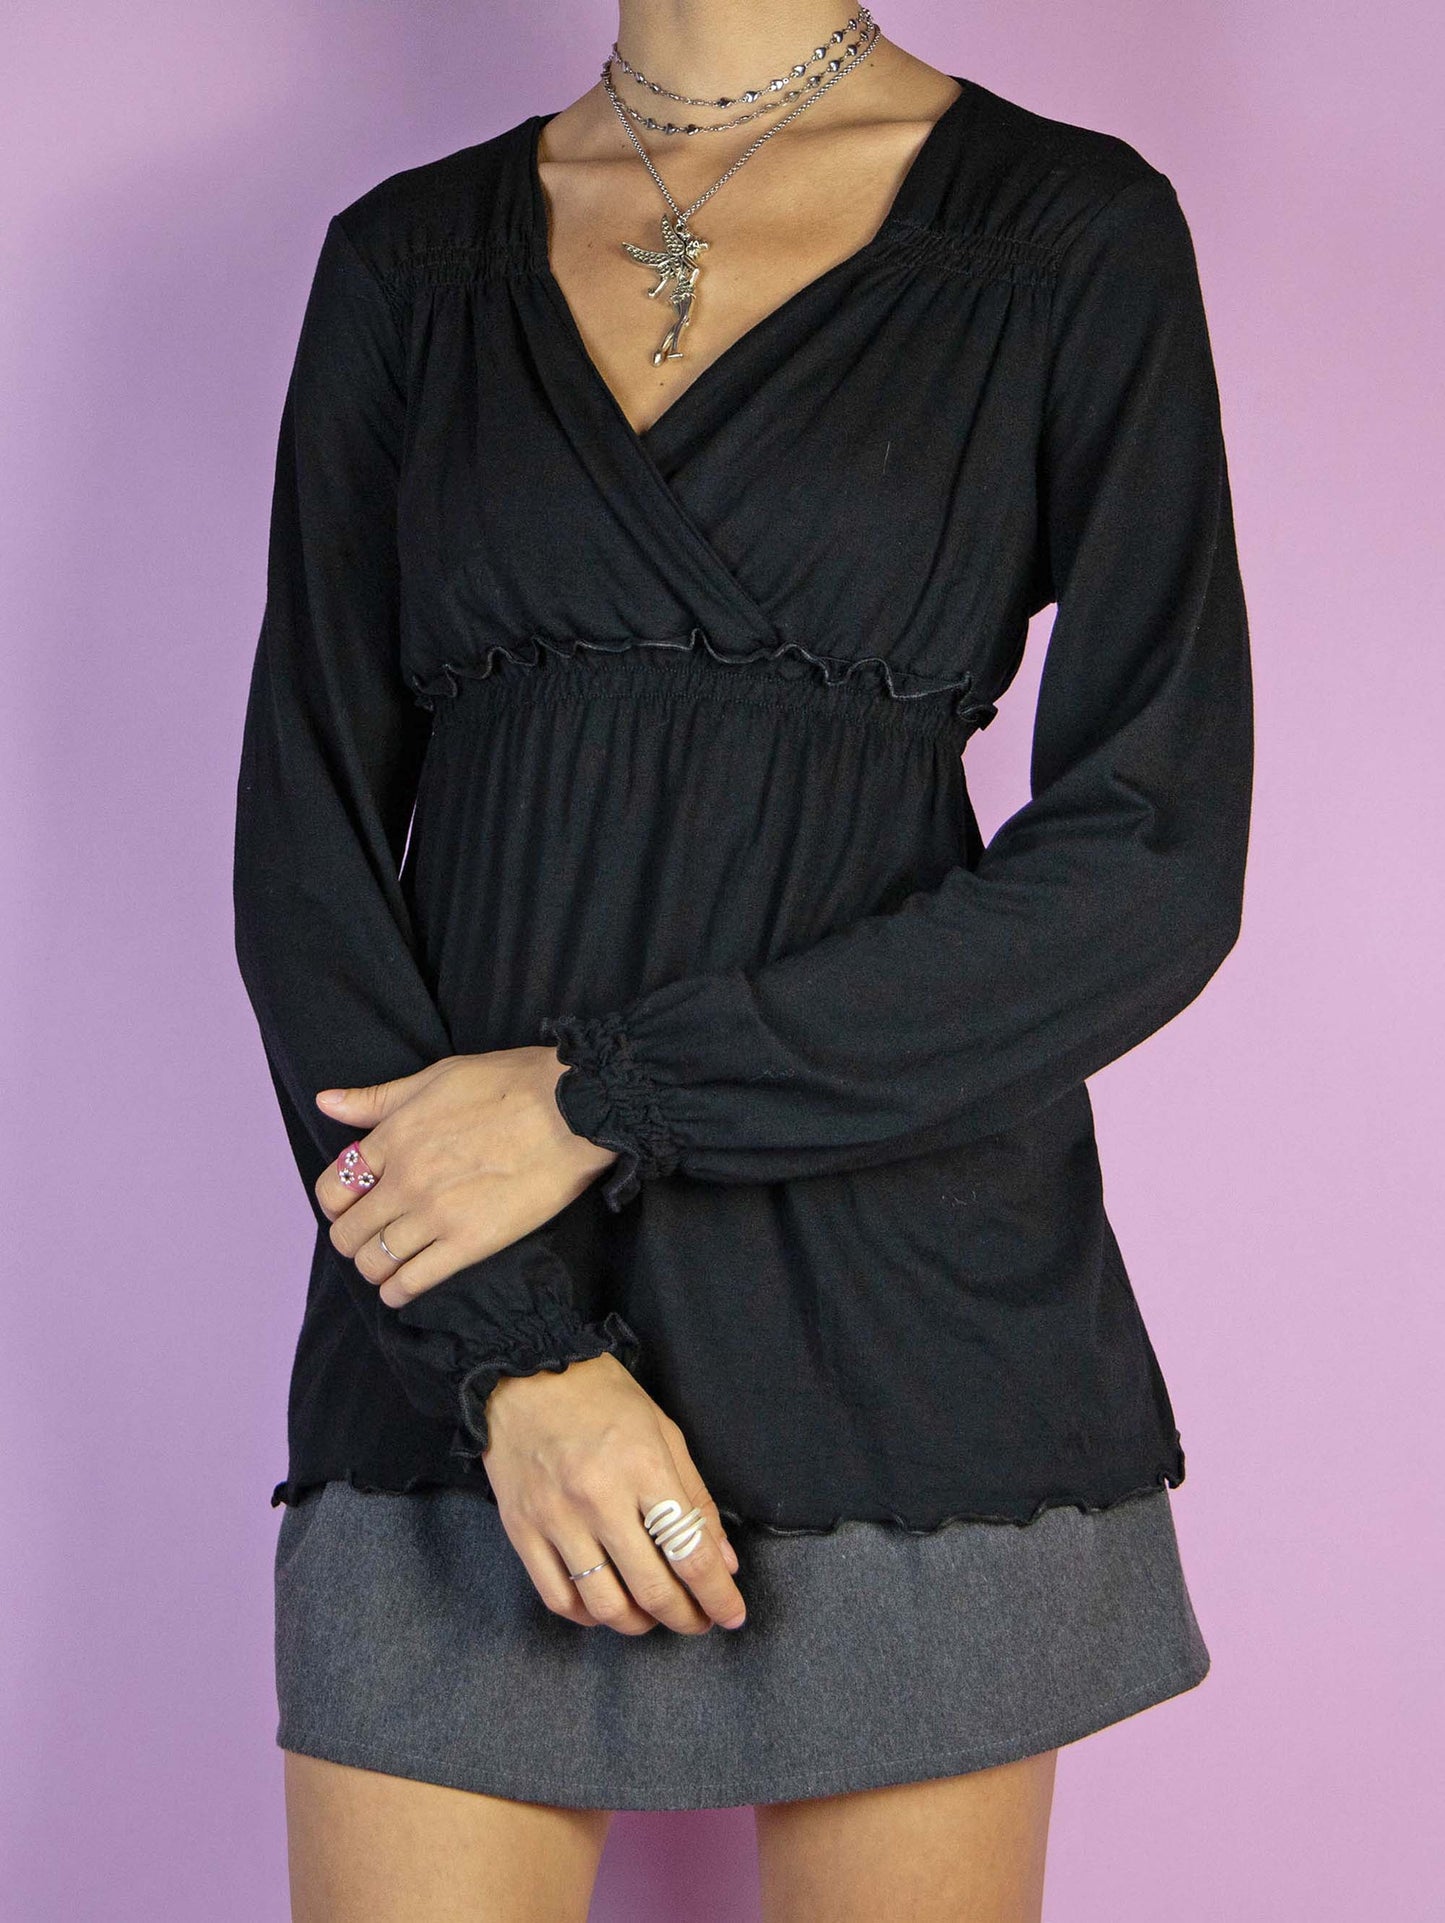 The Y2K Black Shirred Waist Top is a vintage black shirt with a V-neck, elastic at the waist, and balloon sleeves. Fairy grunge whimsygoth 2000s Morgan De Toi blouse.